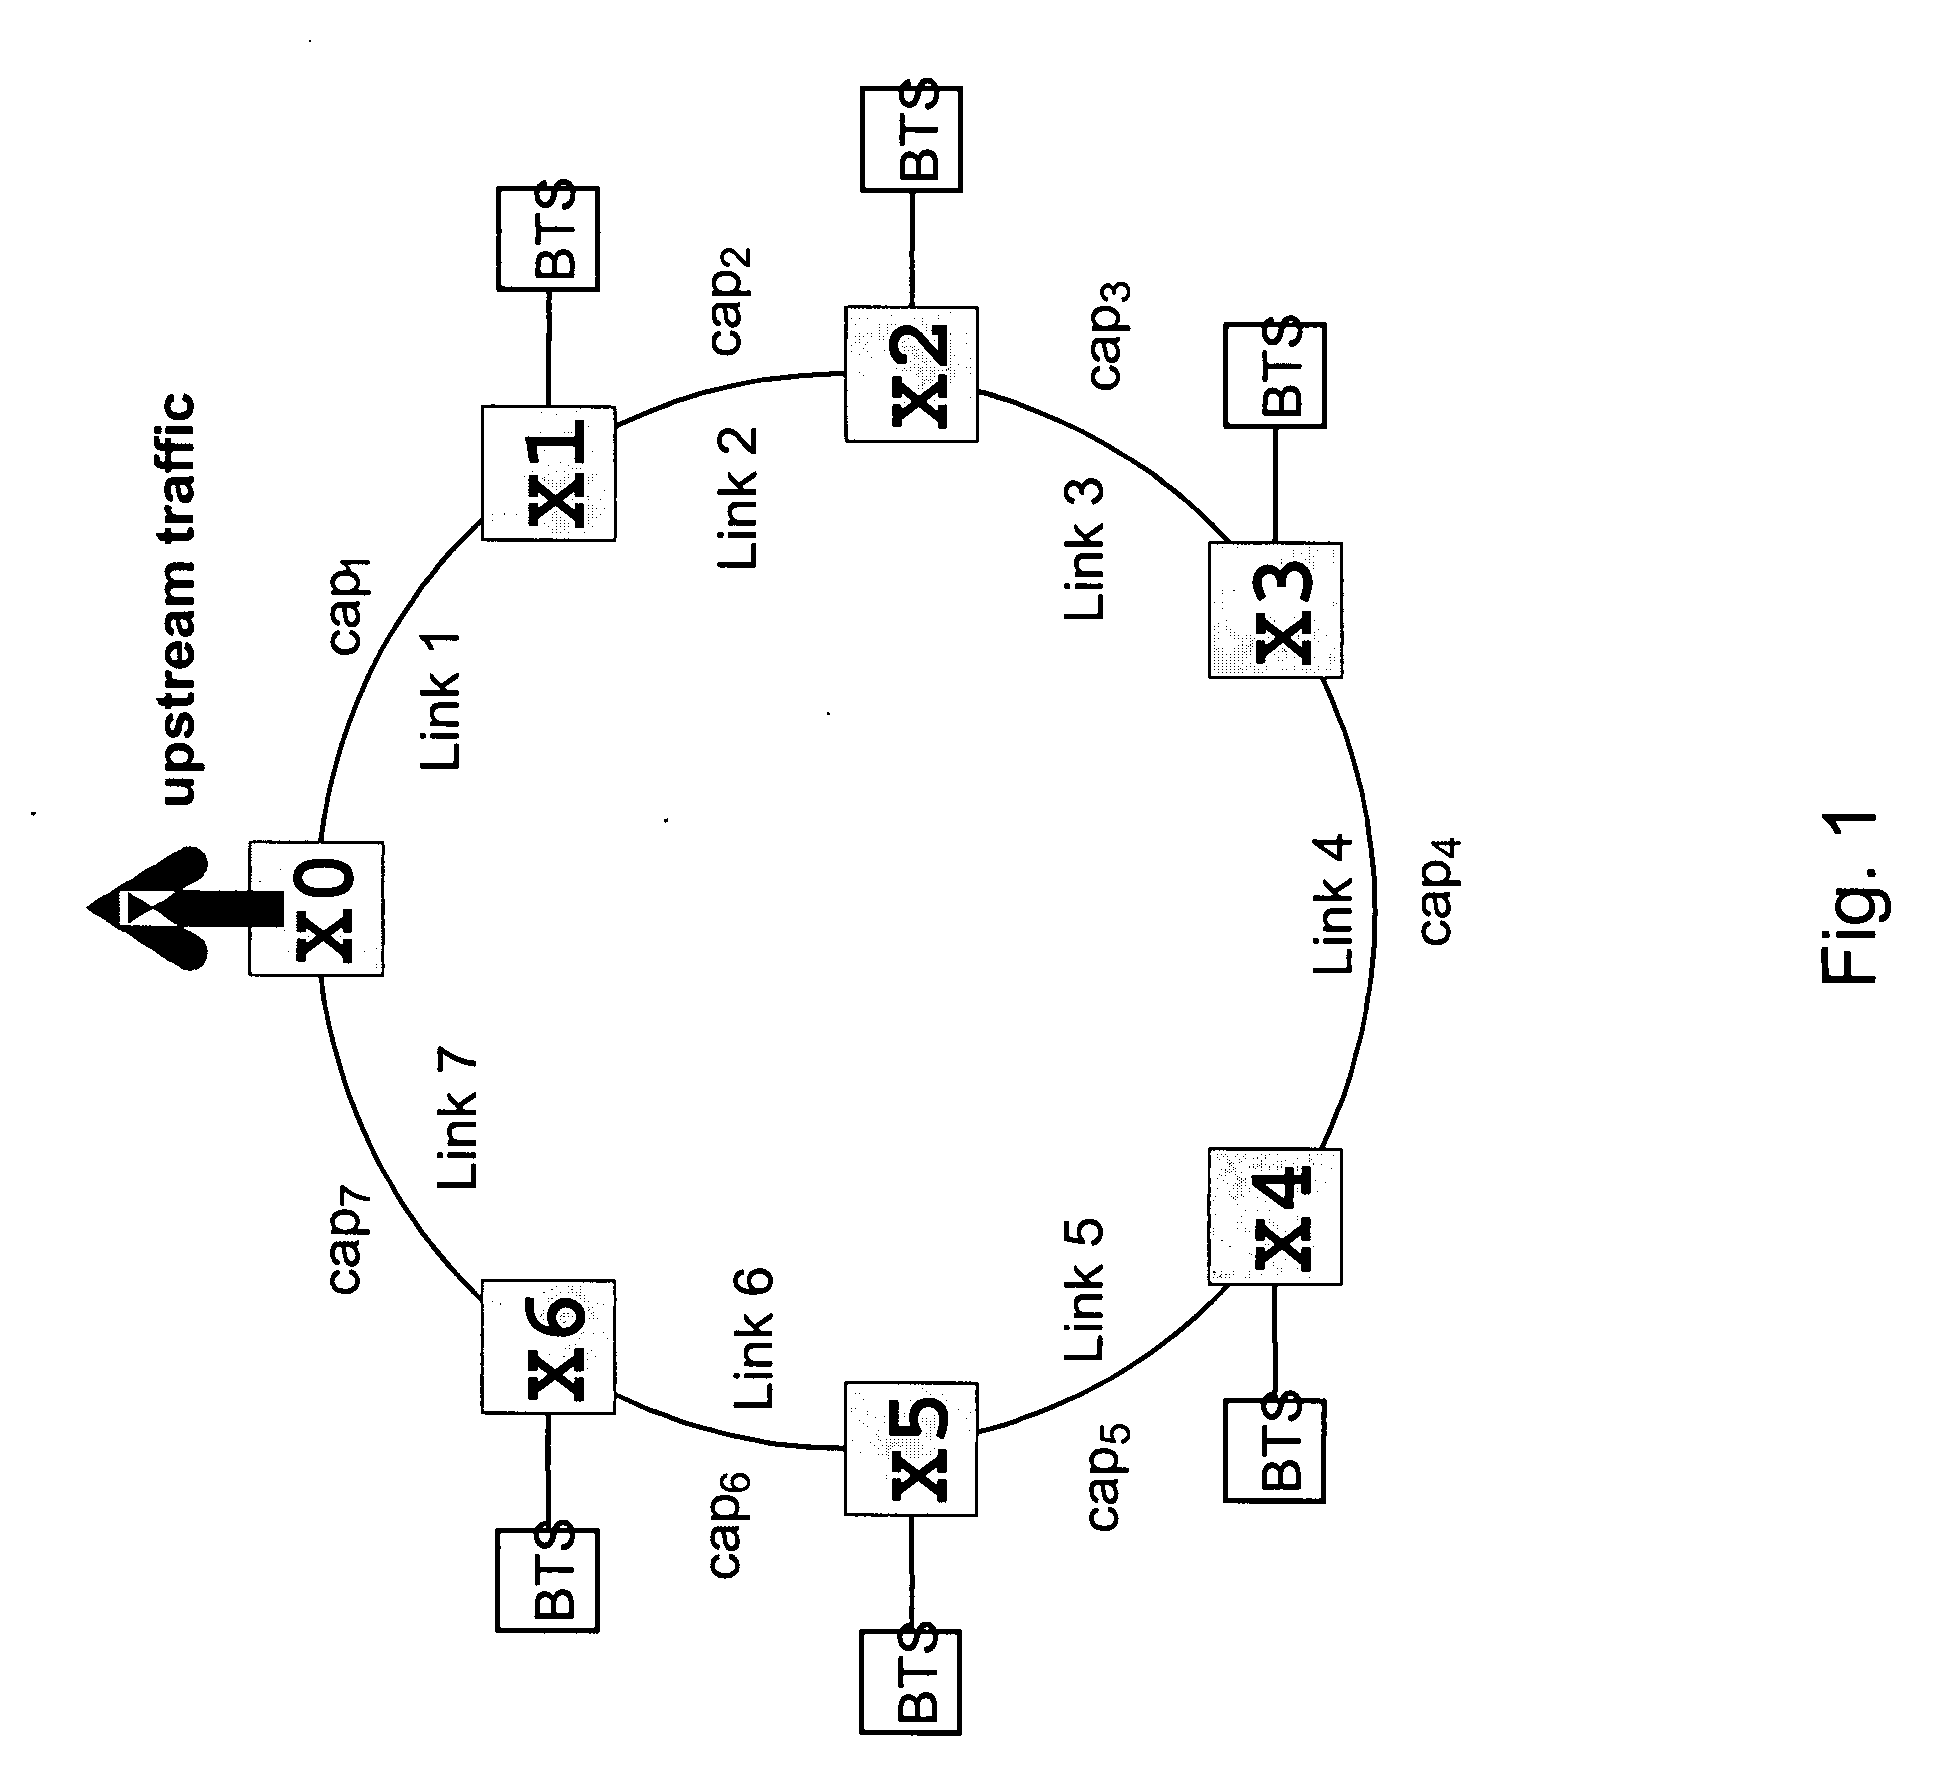 Traffic protection in a communication network